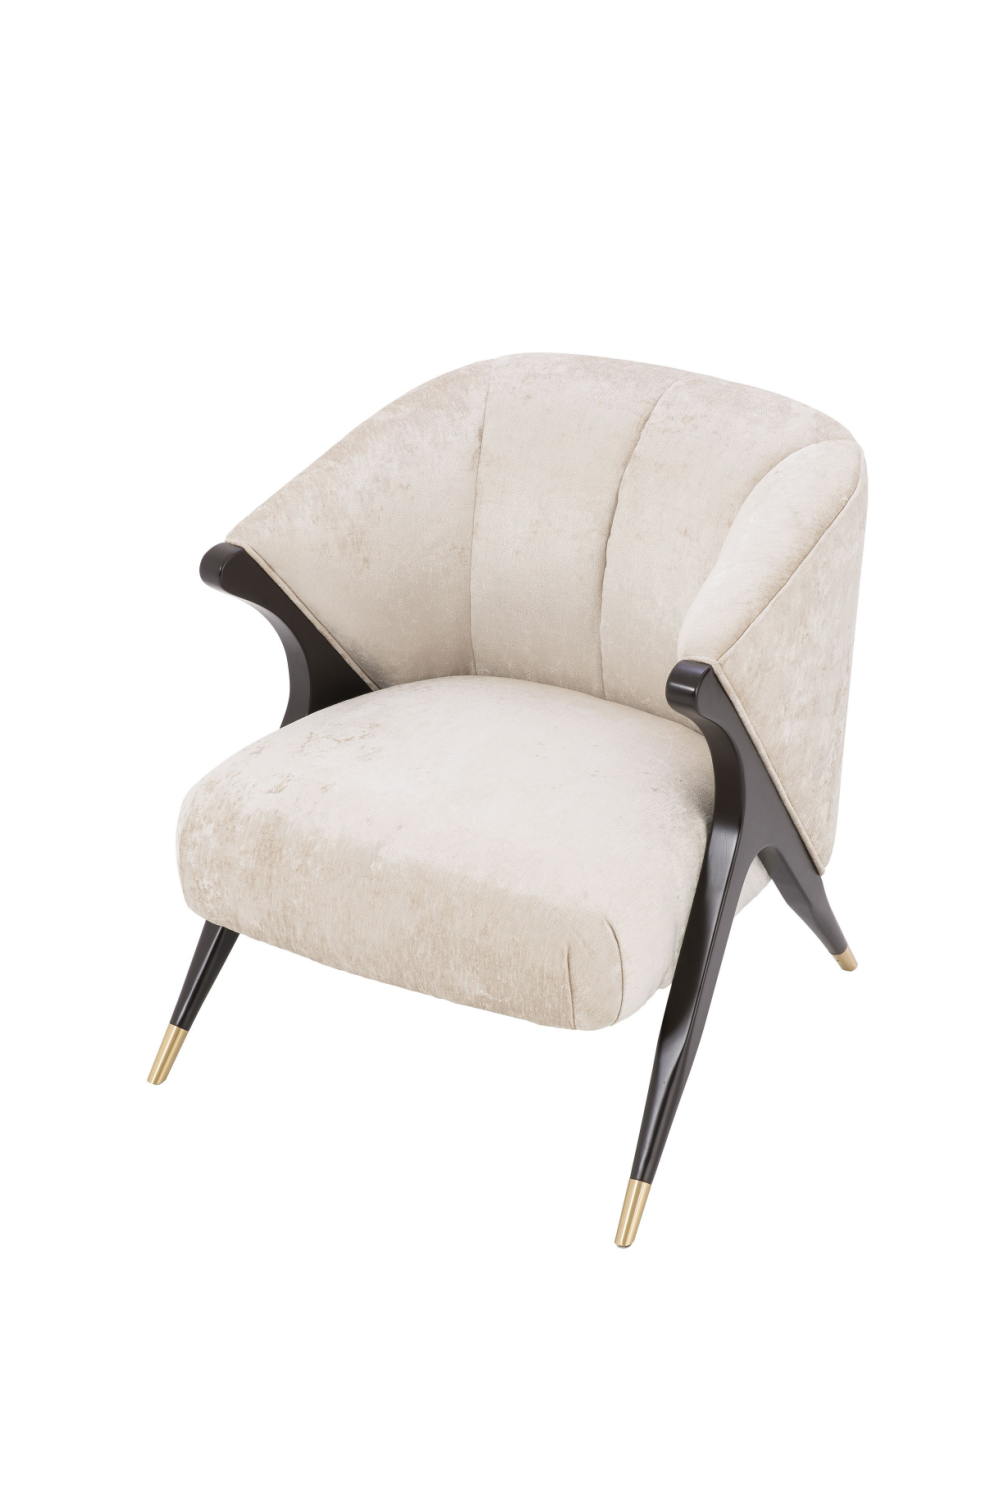 Off-White Upholstered Barrel Chair | Eichholtz Pavone | Oroa.com